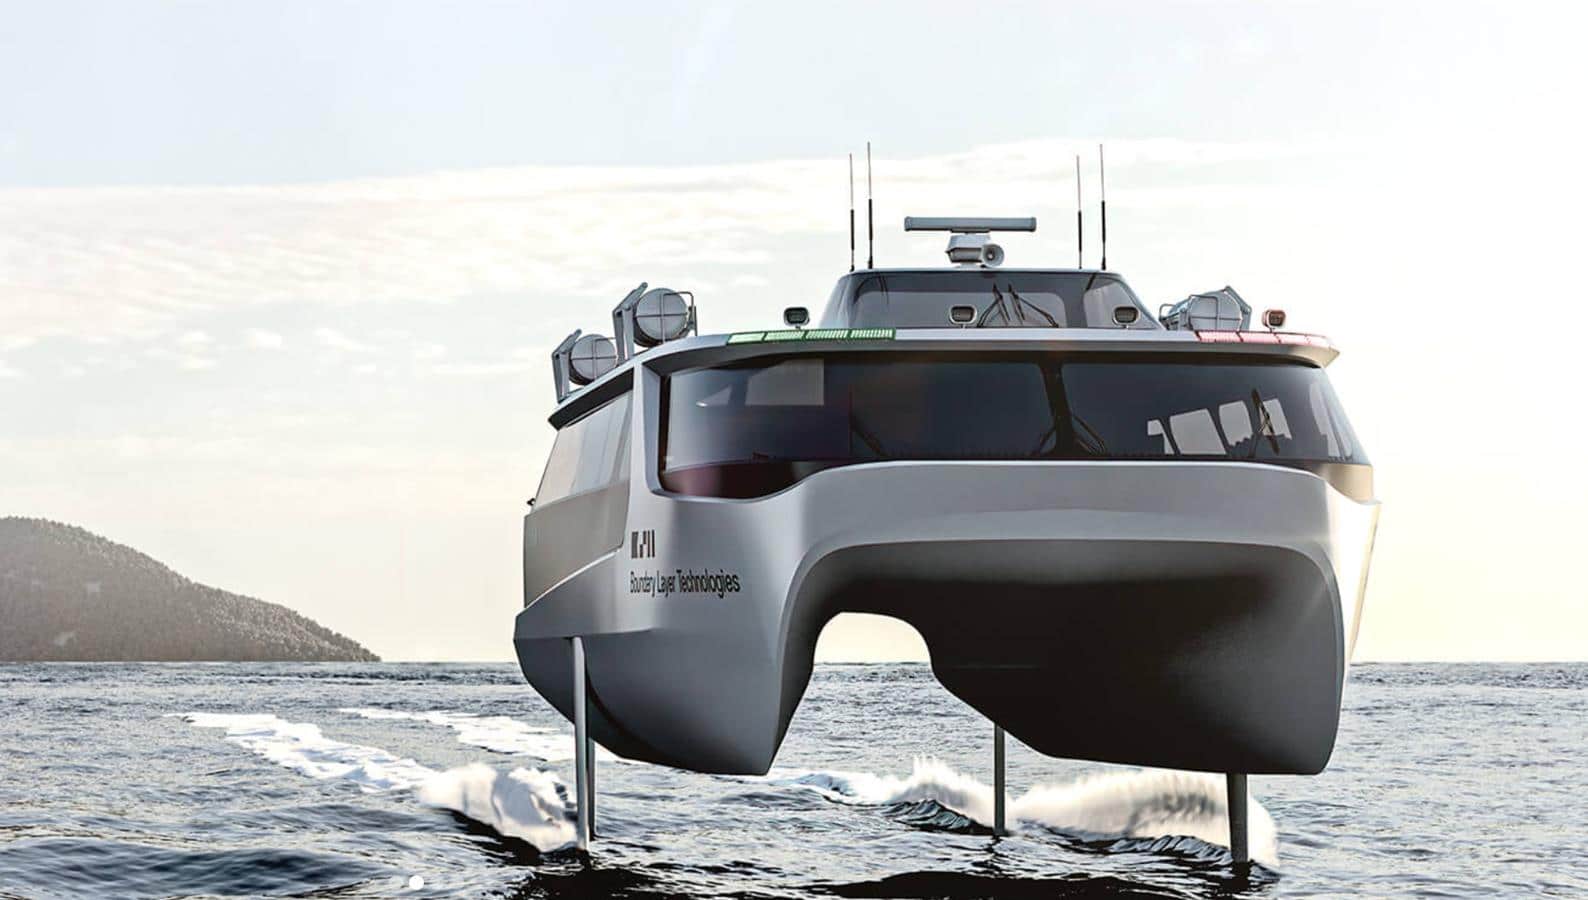 How to electrify passenger ferries?  Just put on hydrofoils